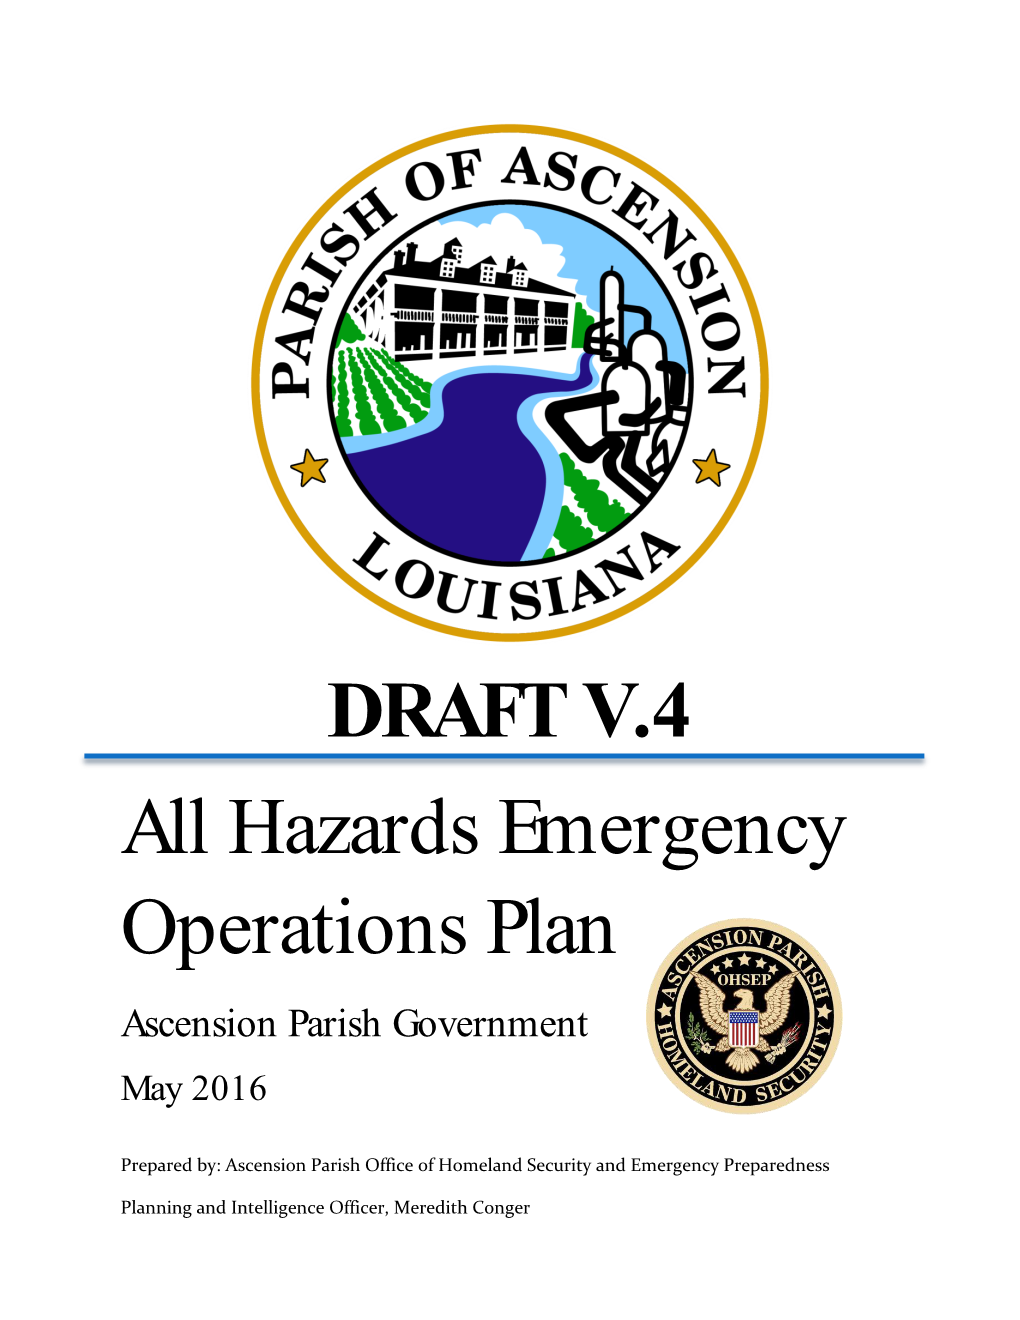 Hazards Emergency Operations Plan Ascension Parish Government May 2016